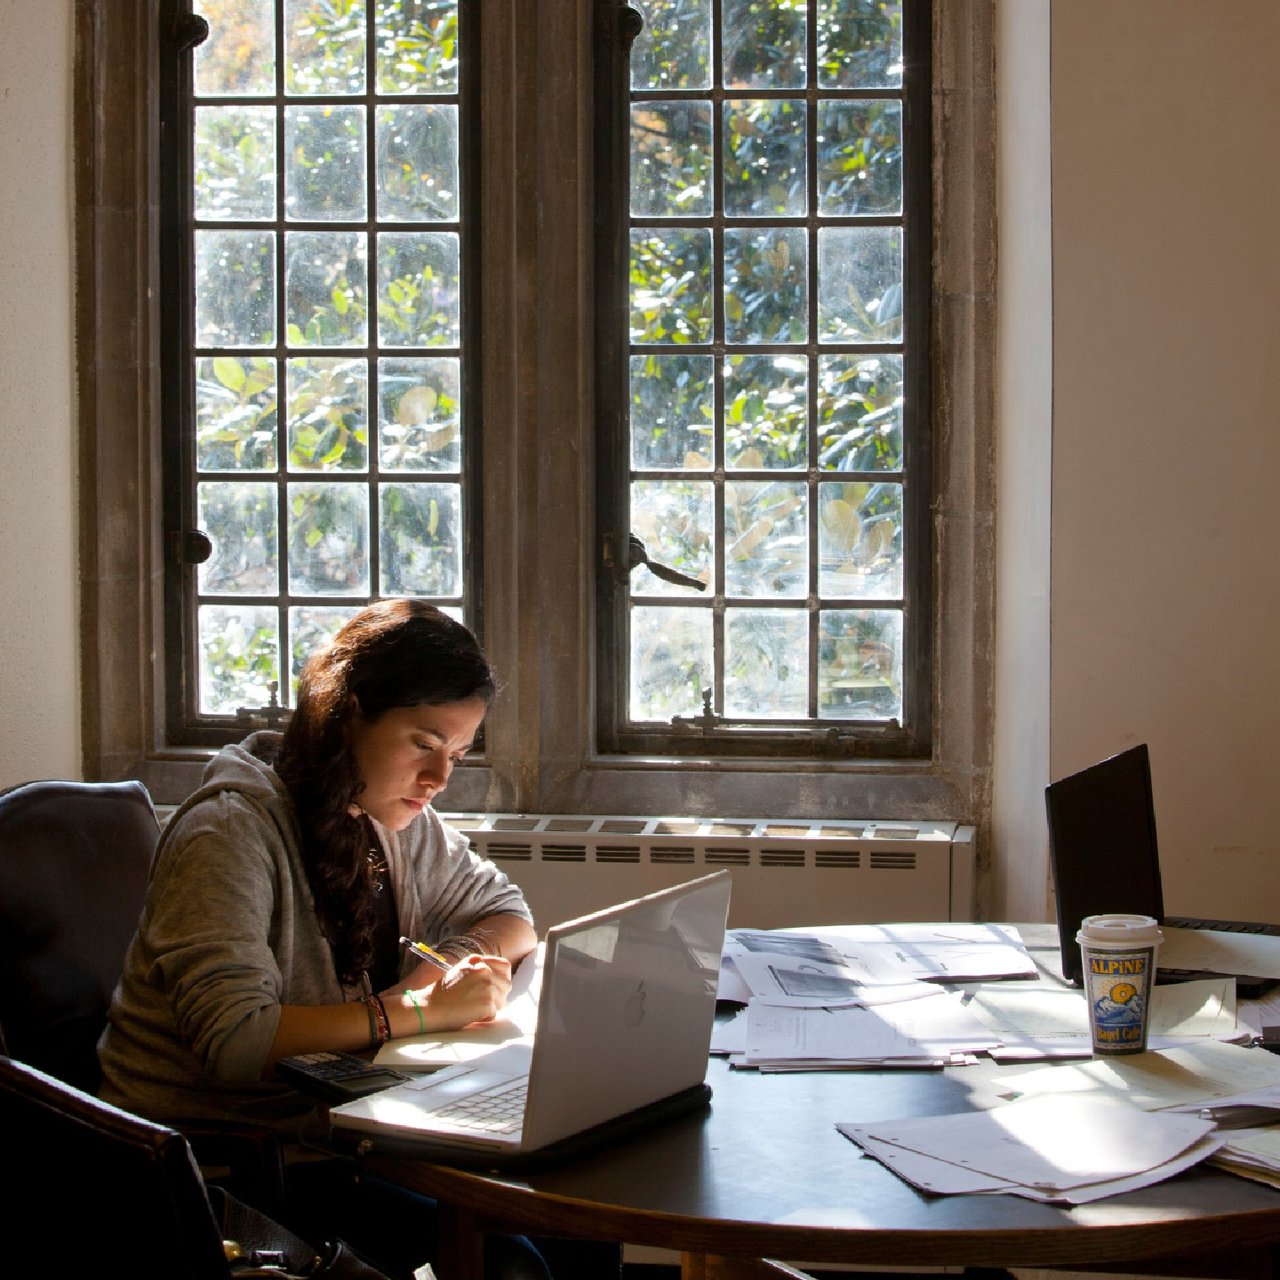 A person sits at a desk with papers strewn around them.